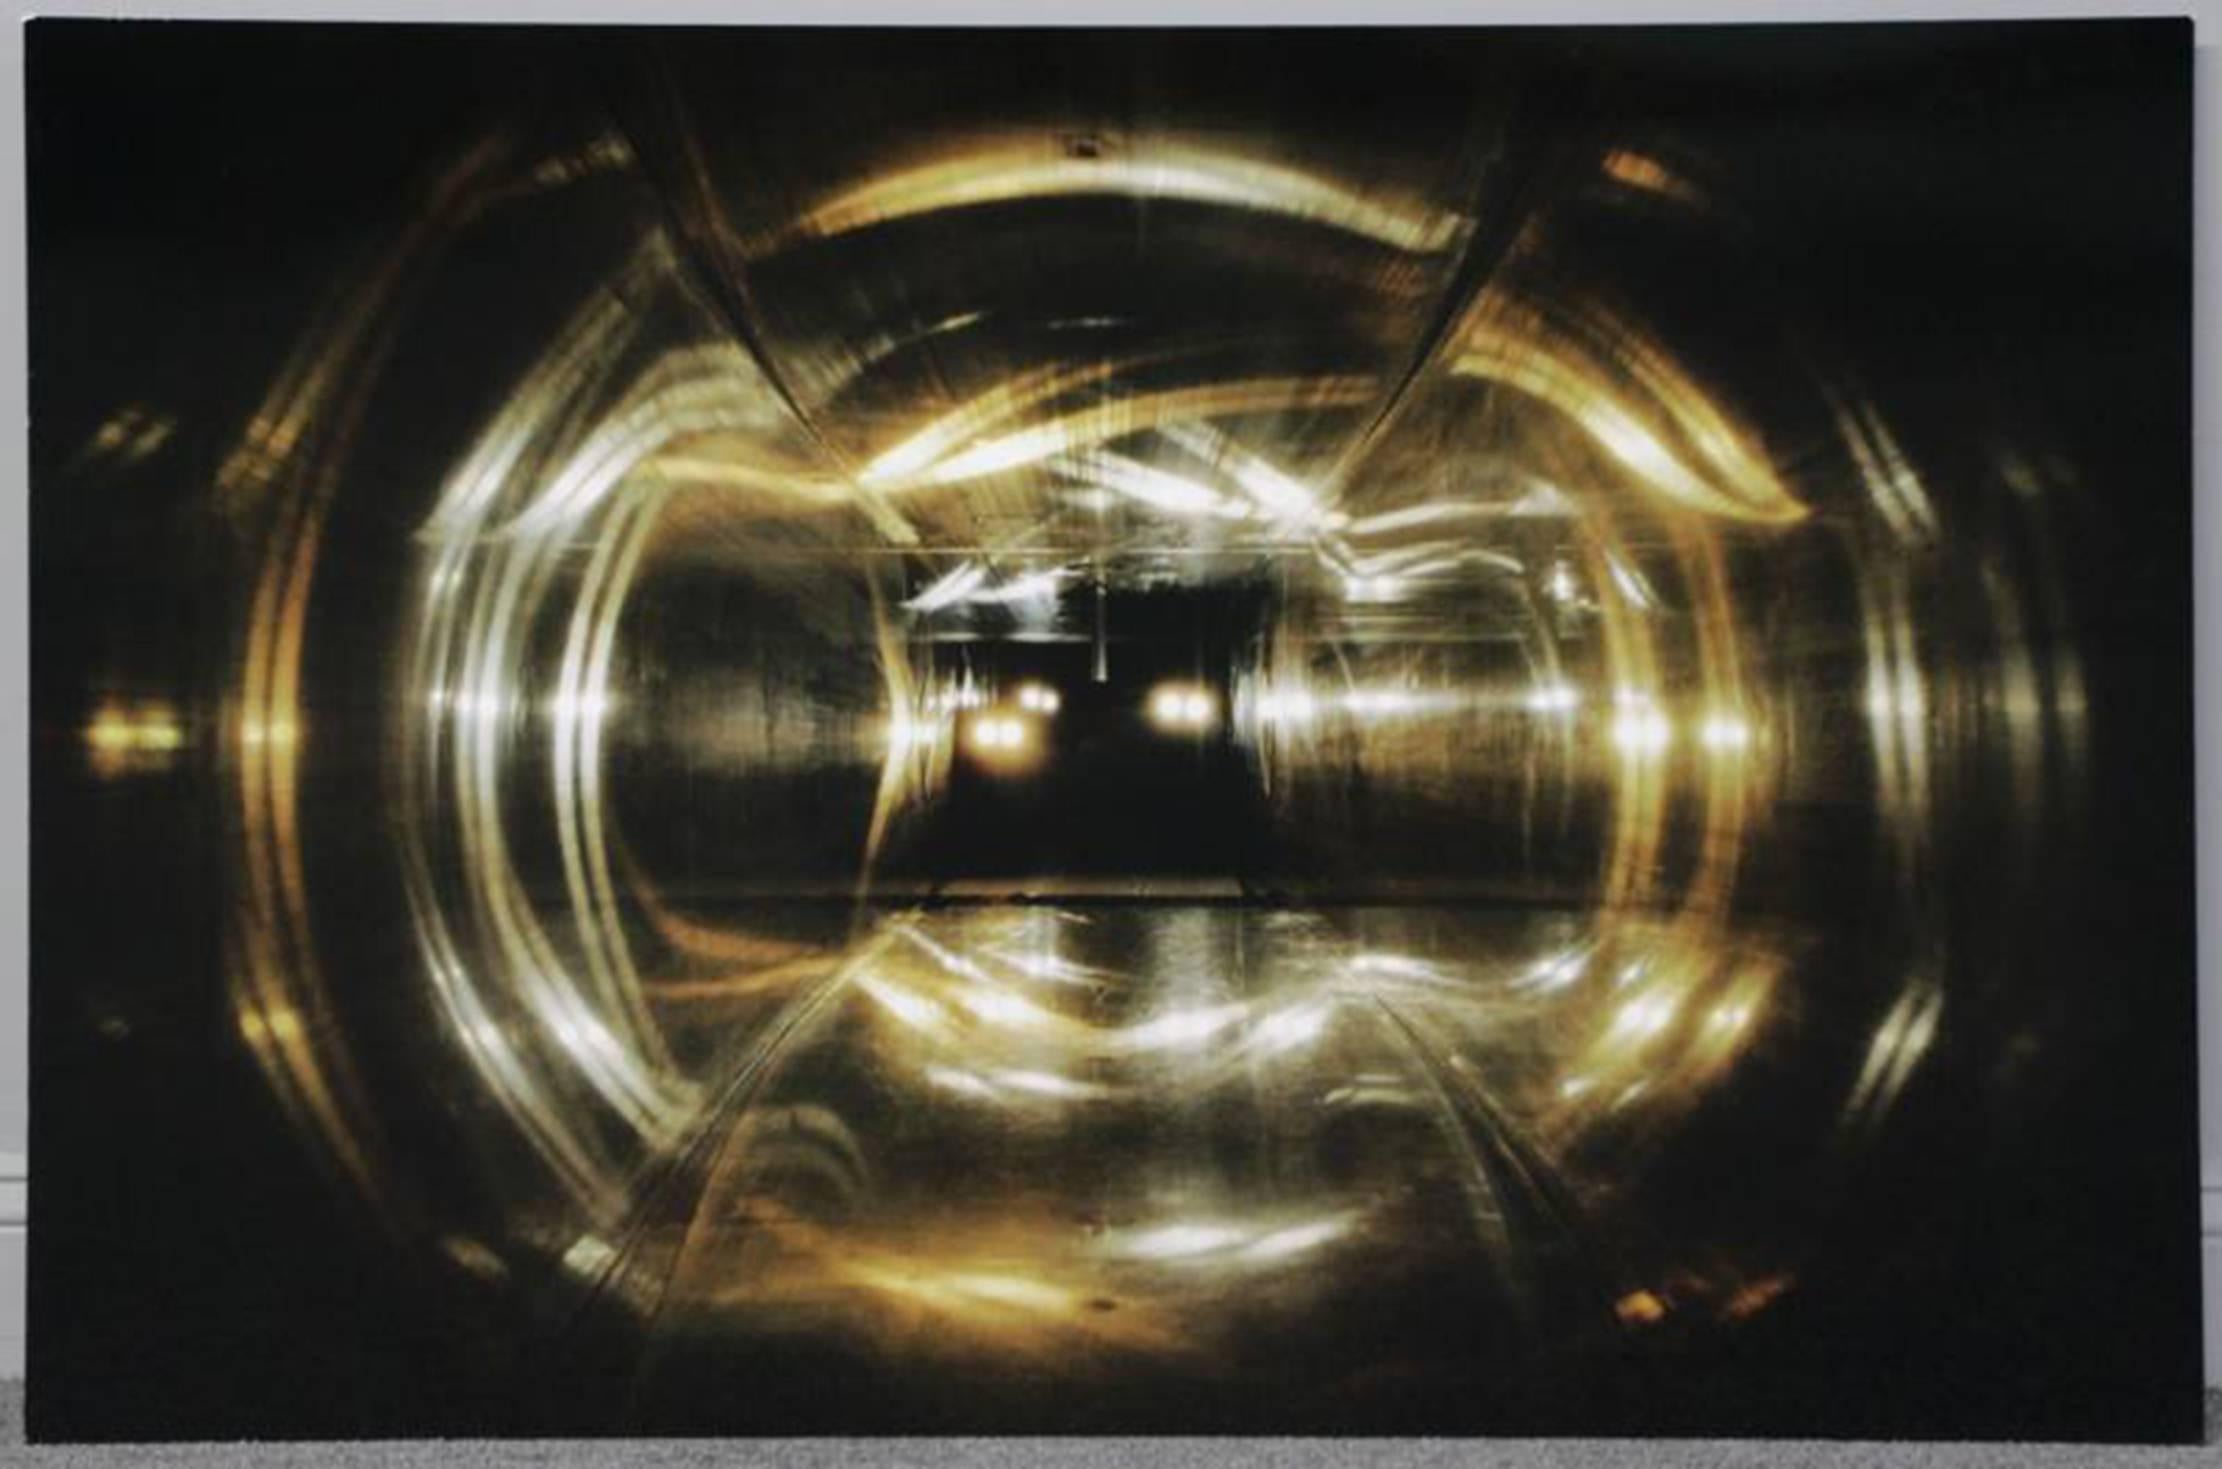 Unknown Abstract Photograph - Large Contemporary Photograph of Abstract Headlights in Tunnel